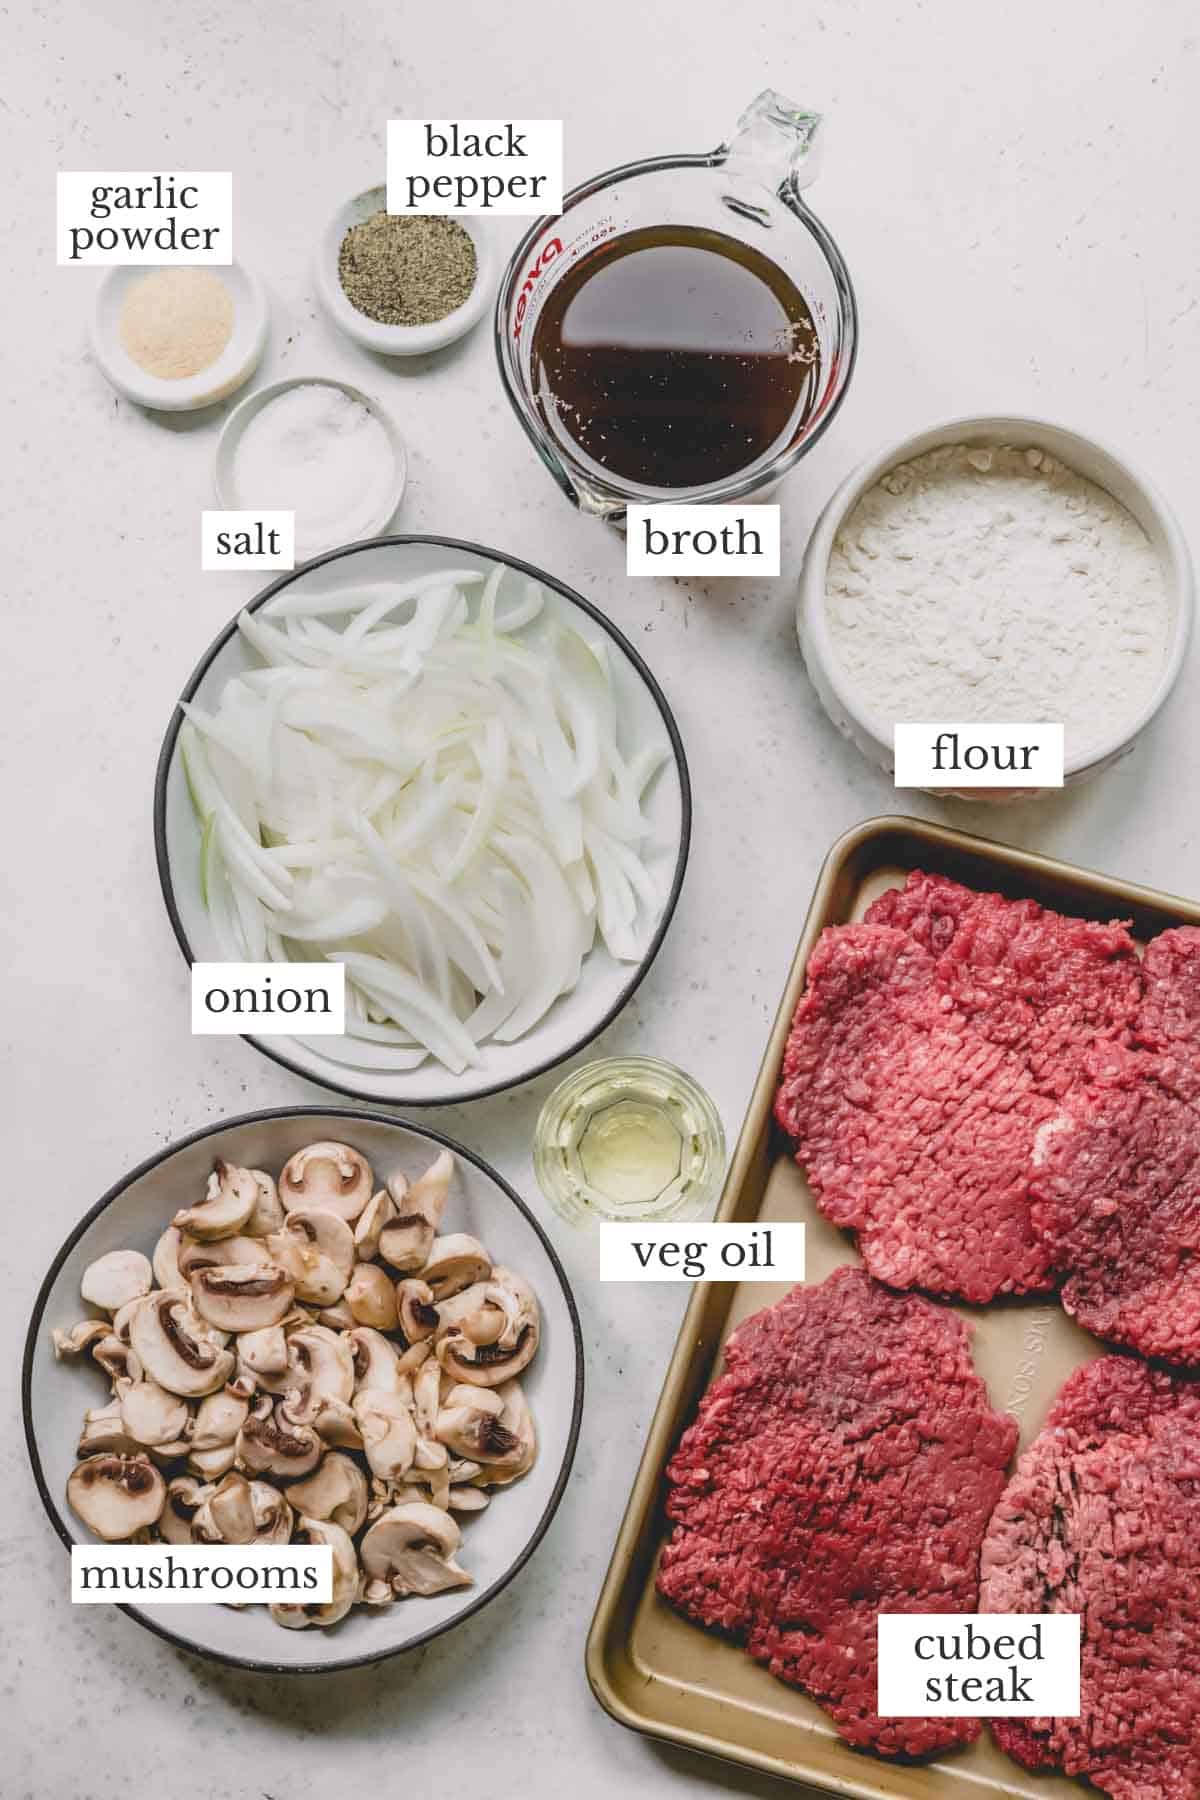 Ingredients for smothered steaks.